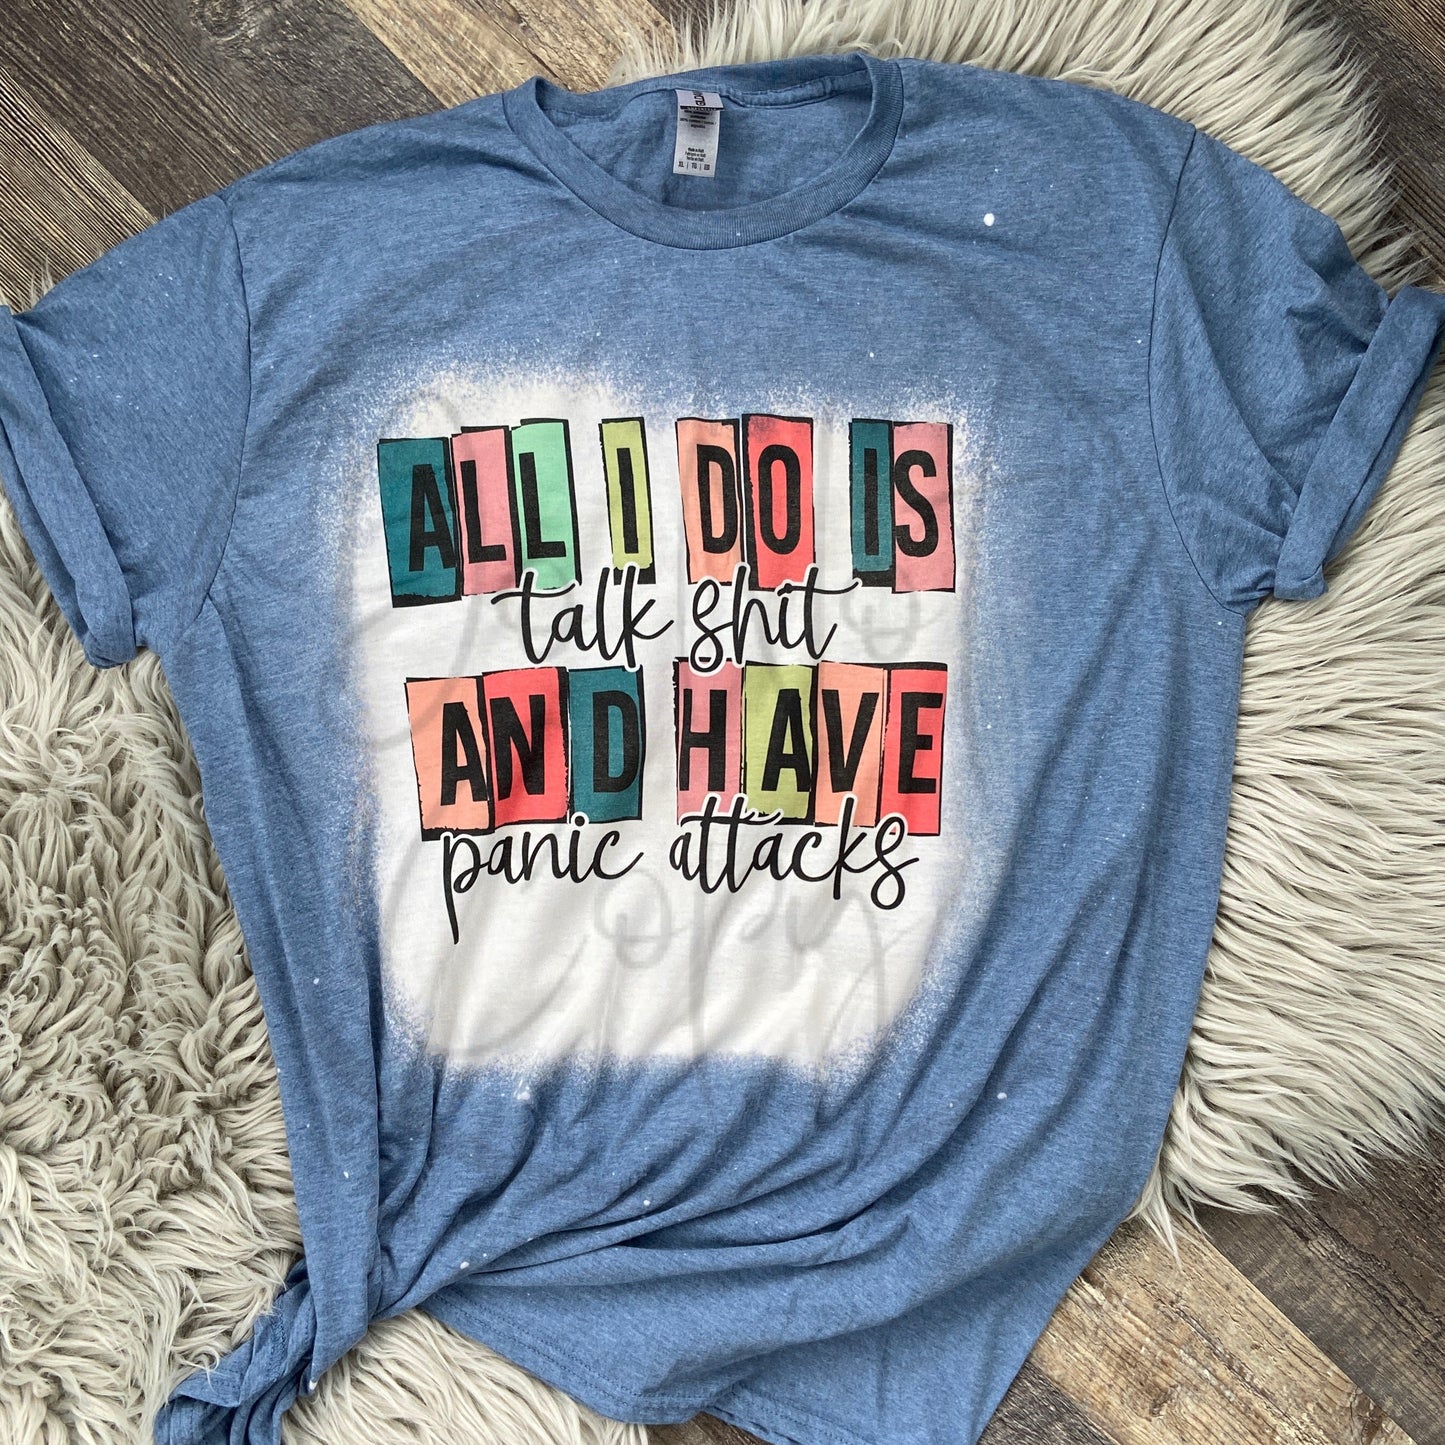 All I do is talk shit and have panic attacks Tee